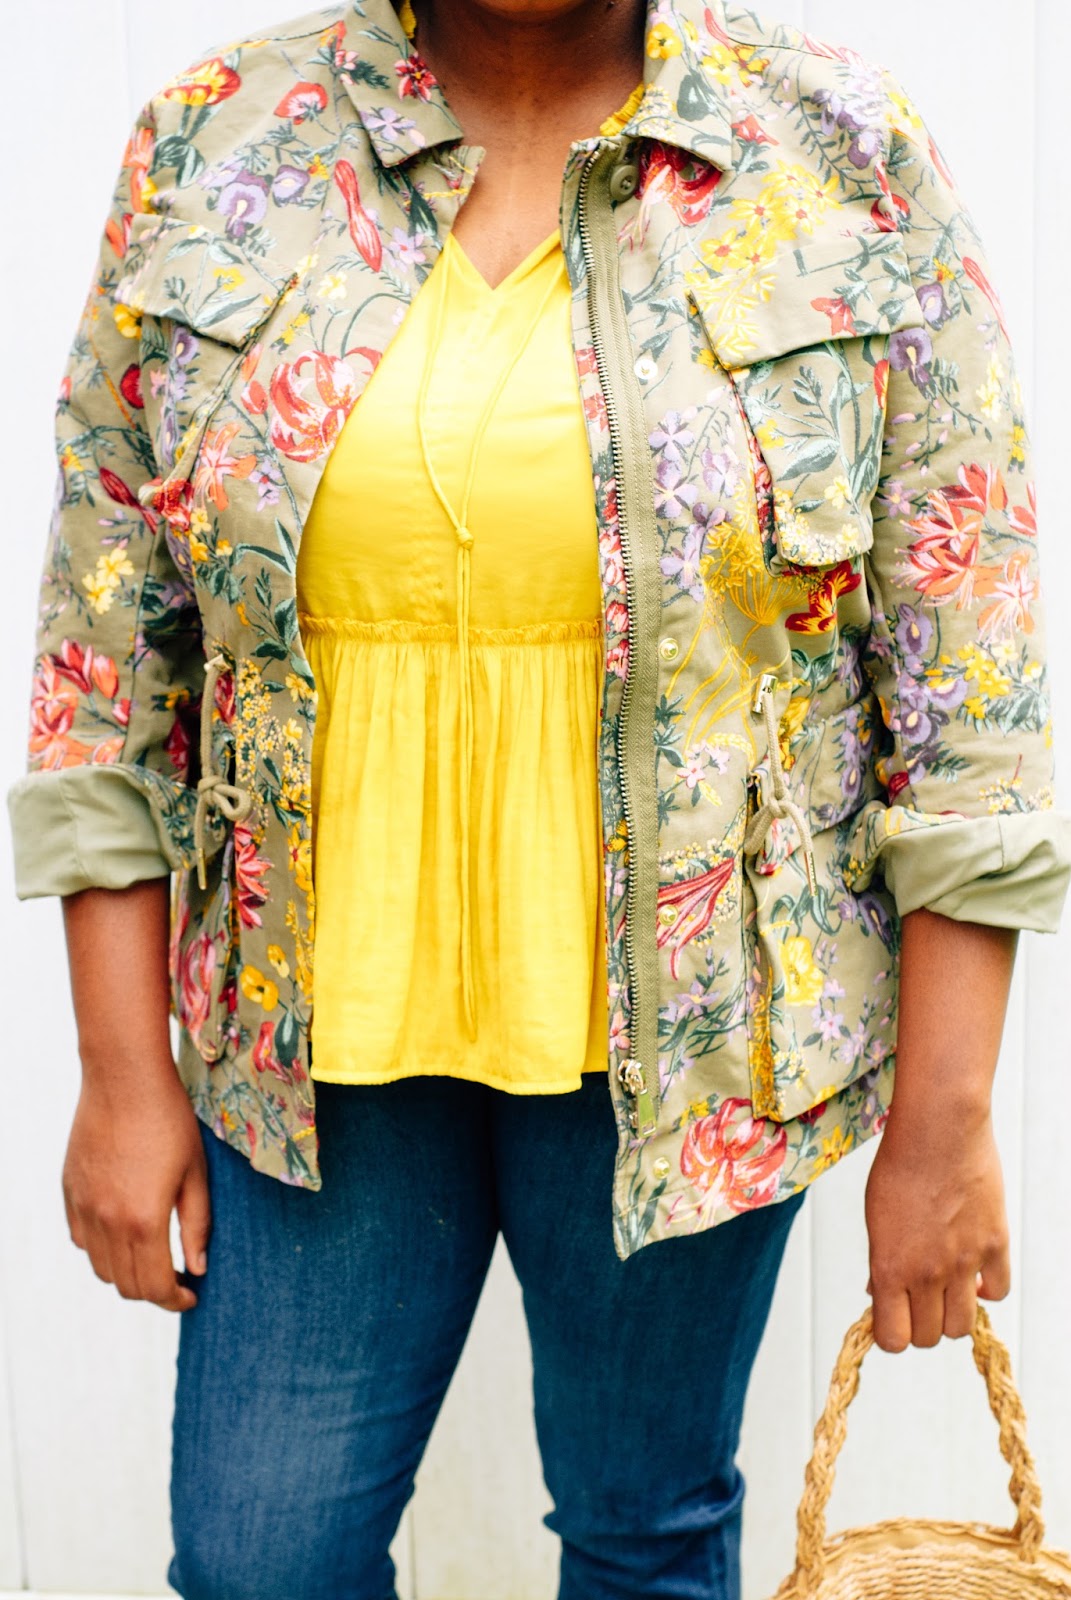 Who doesn't love a versatile statement piece? This floral jacket from H&M is my new favorite piece in my closet. It instantly makes any outfit feel like spring while being heavy enough to keep me warm on those days where it feels more like winter is still hanging around. I love it so much that I want to wear it all the time!